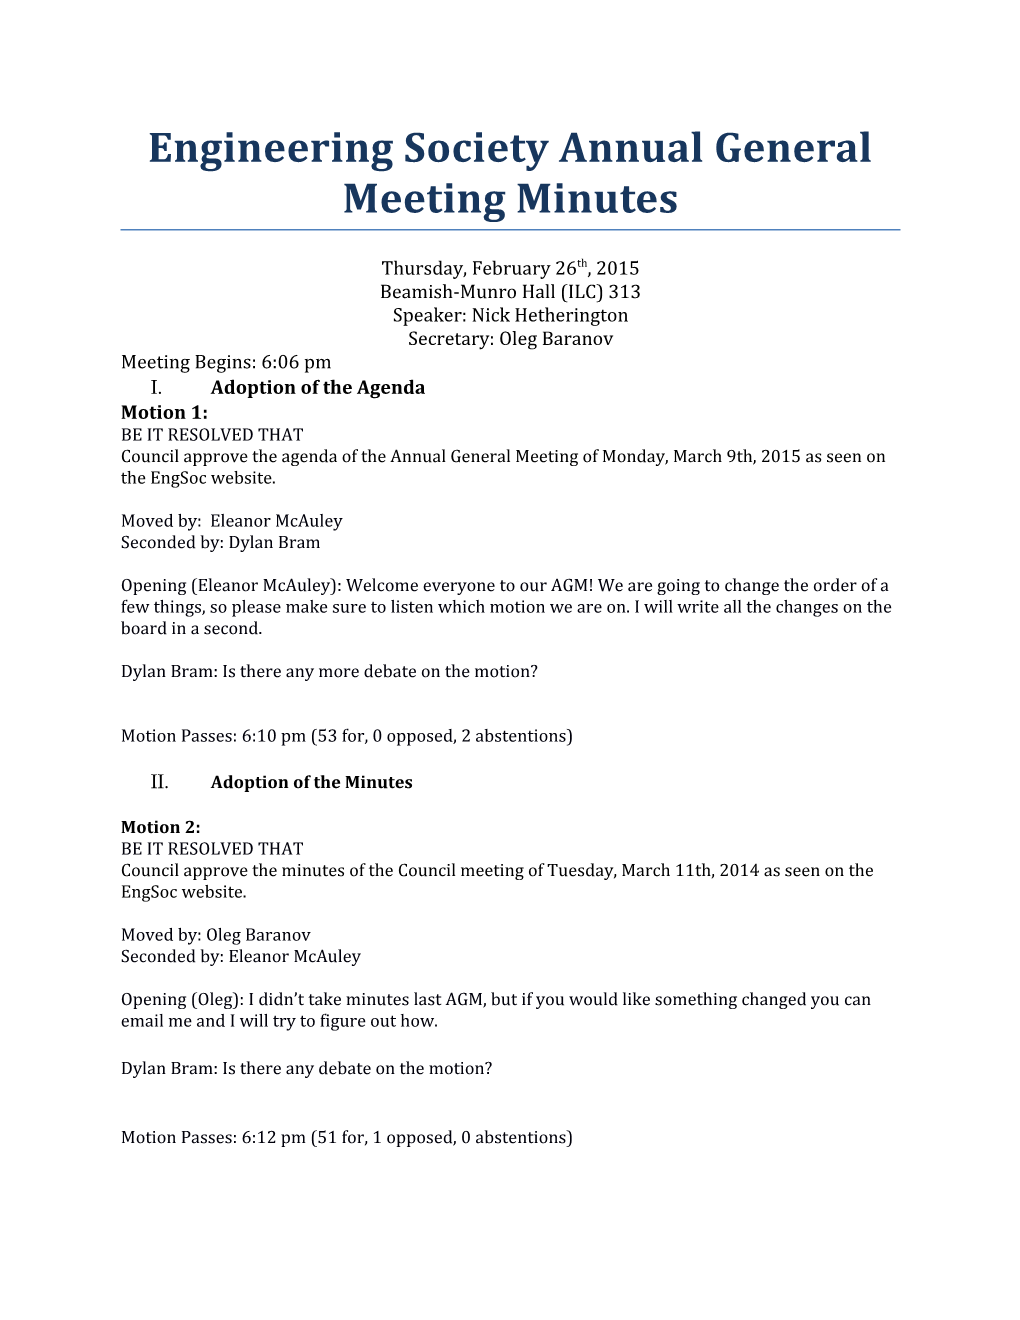 Engineering Society Annual General Meeting Minutes